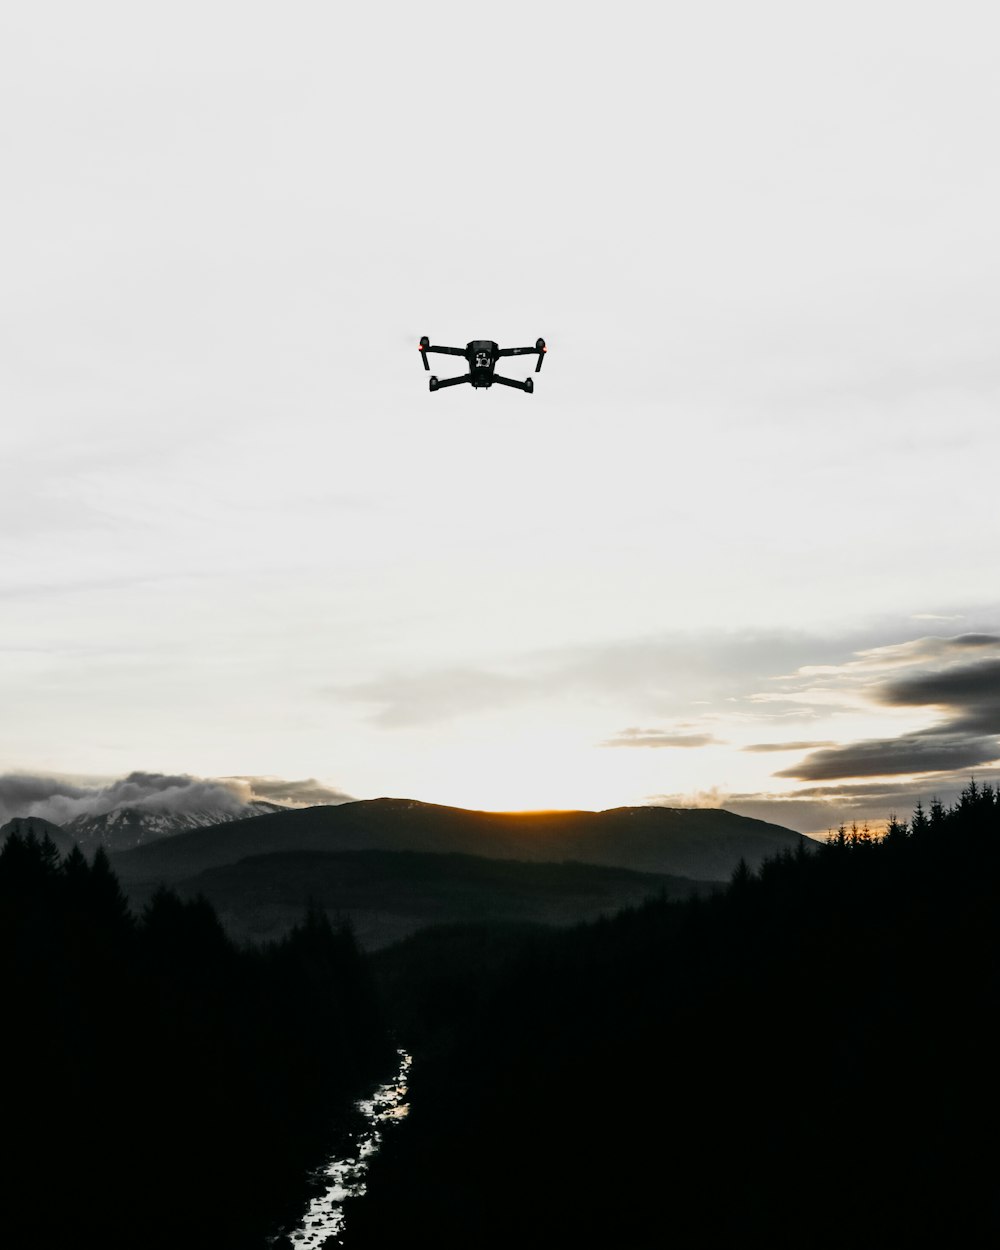 black quadcopter in the sky overlooking trees and mountain